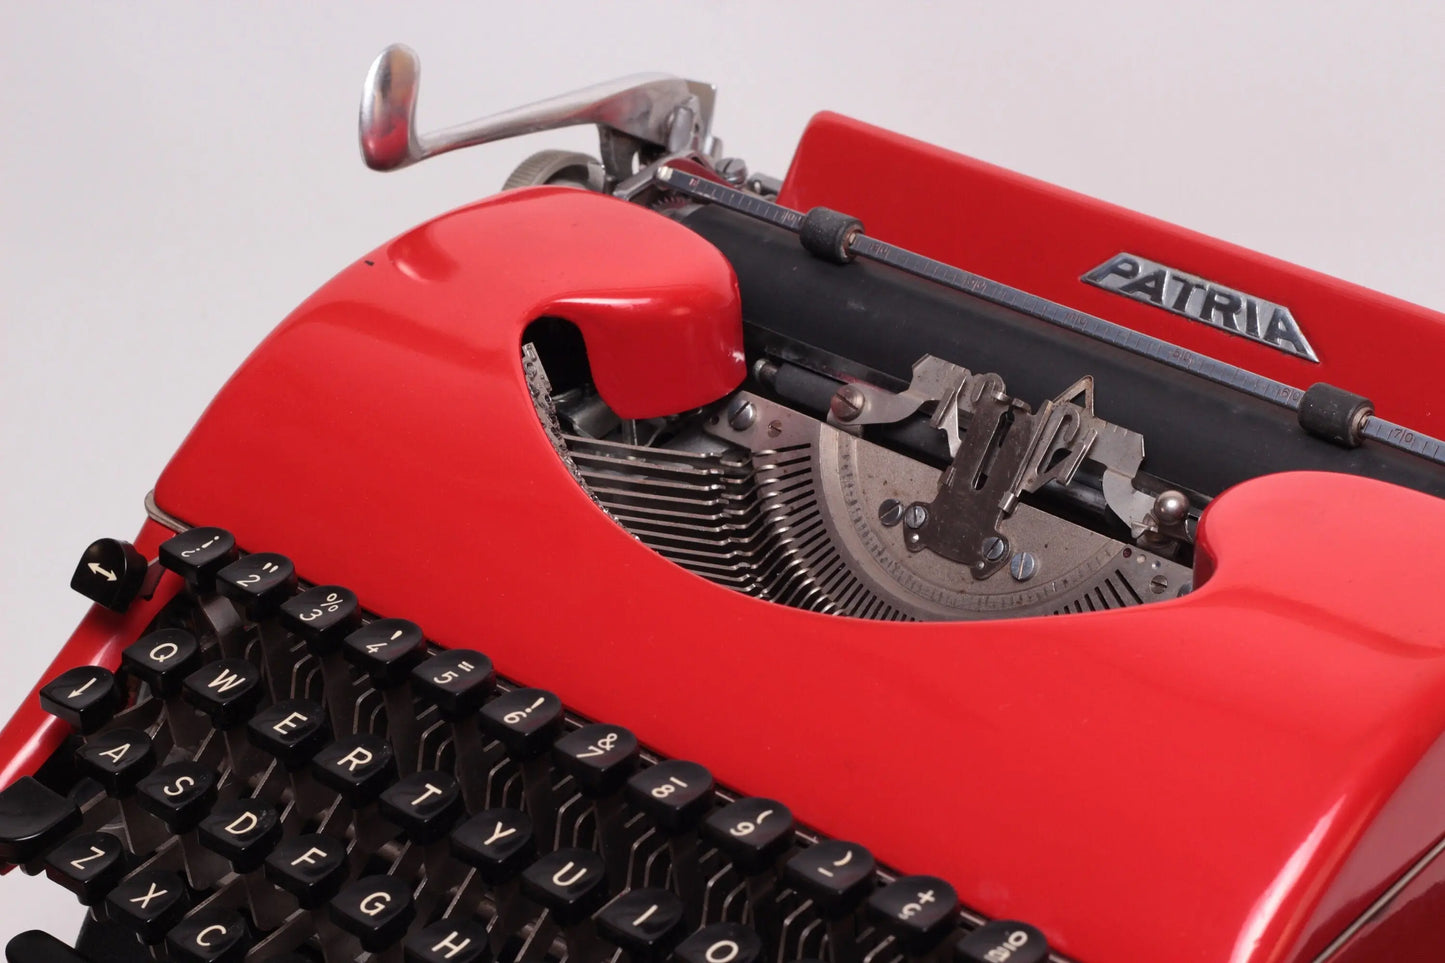 Limited Edition Patria Red Typewriter, Vintage, Mint Condition, Manual Portable, Professionally Serviced by Typewriter.Company - ElGranero Typewriter.Company